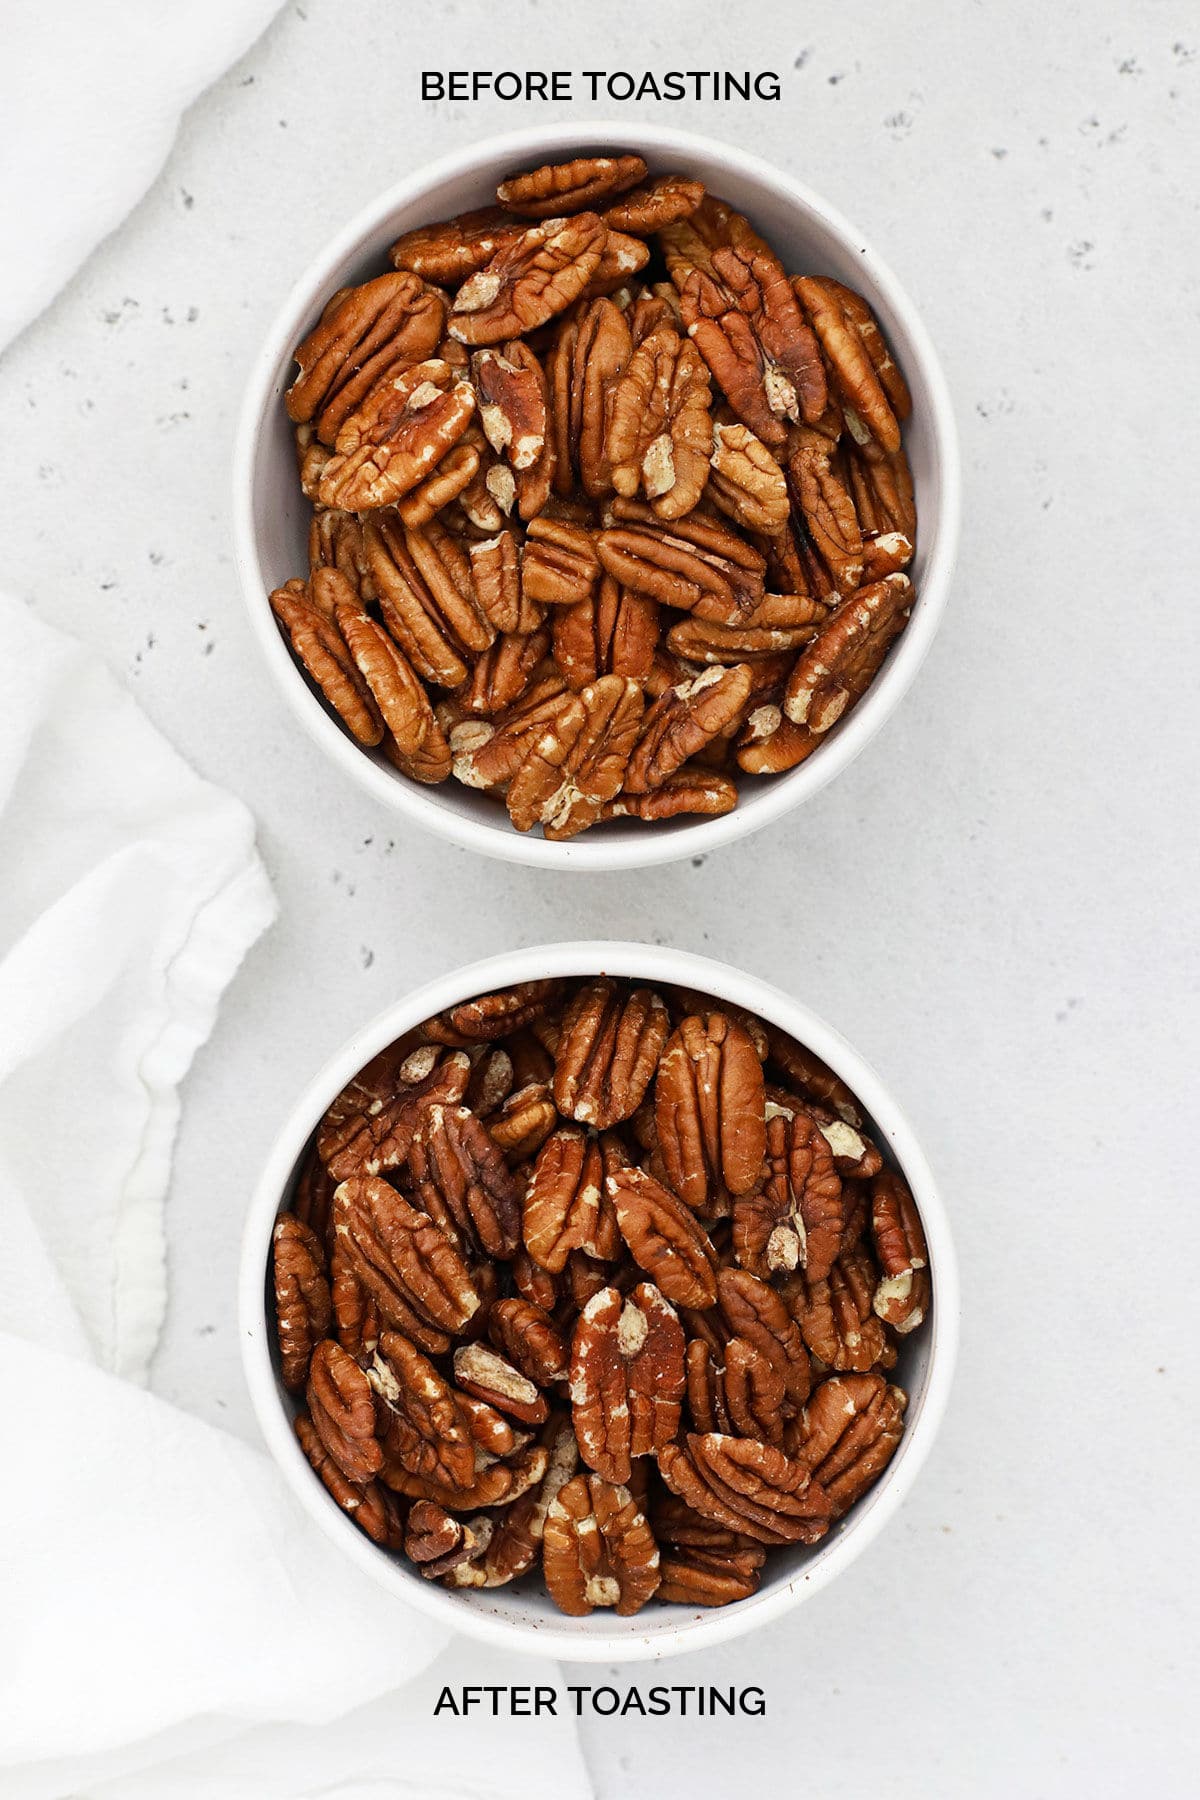 One bowl of raw pecans and one bowl of toasted pecans